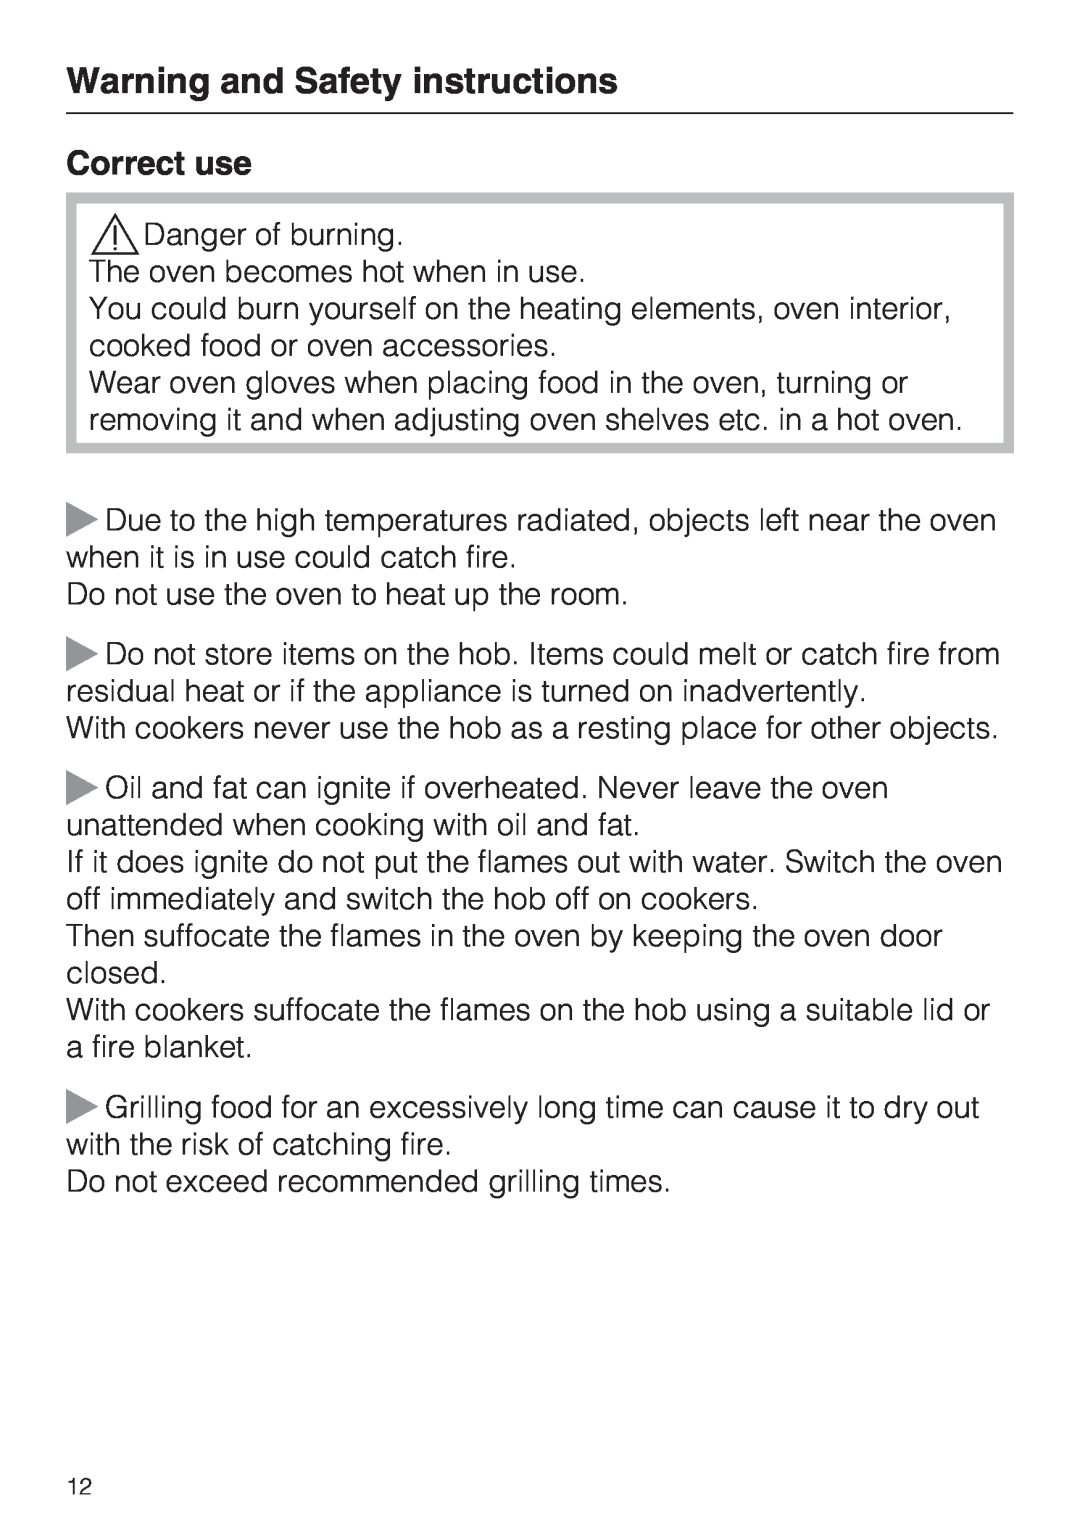 Miele 10 102 470 installation instructions Correct use, Warning and Safety instructions 